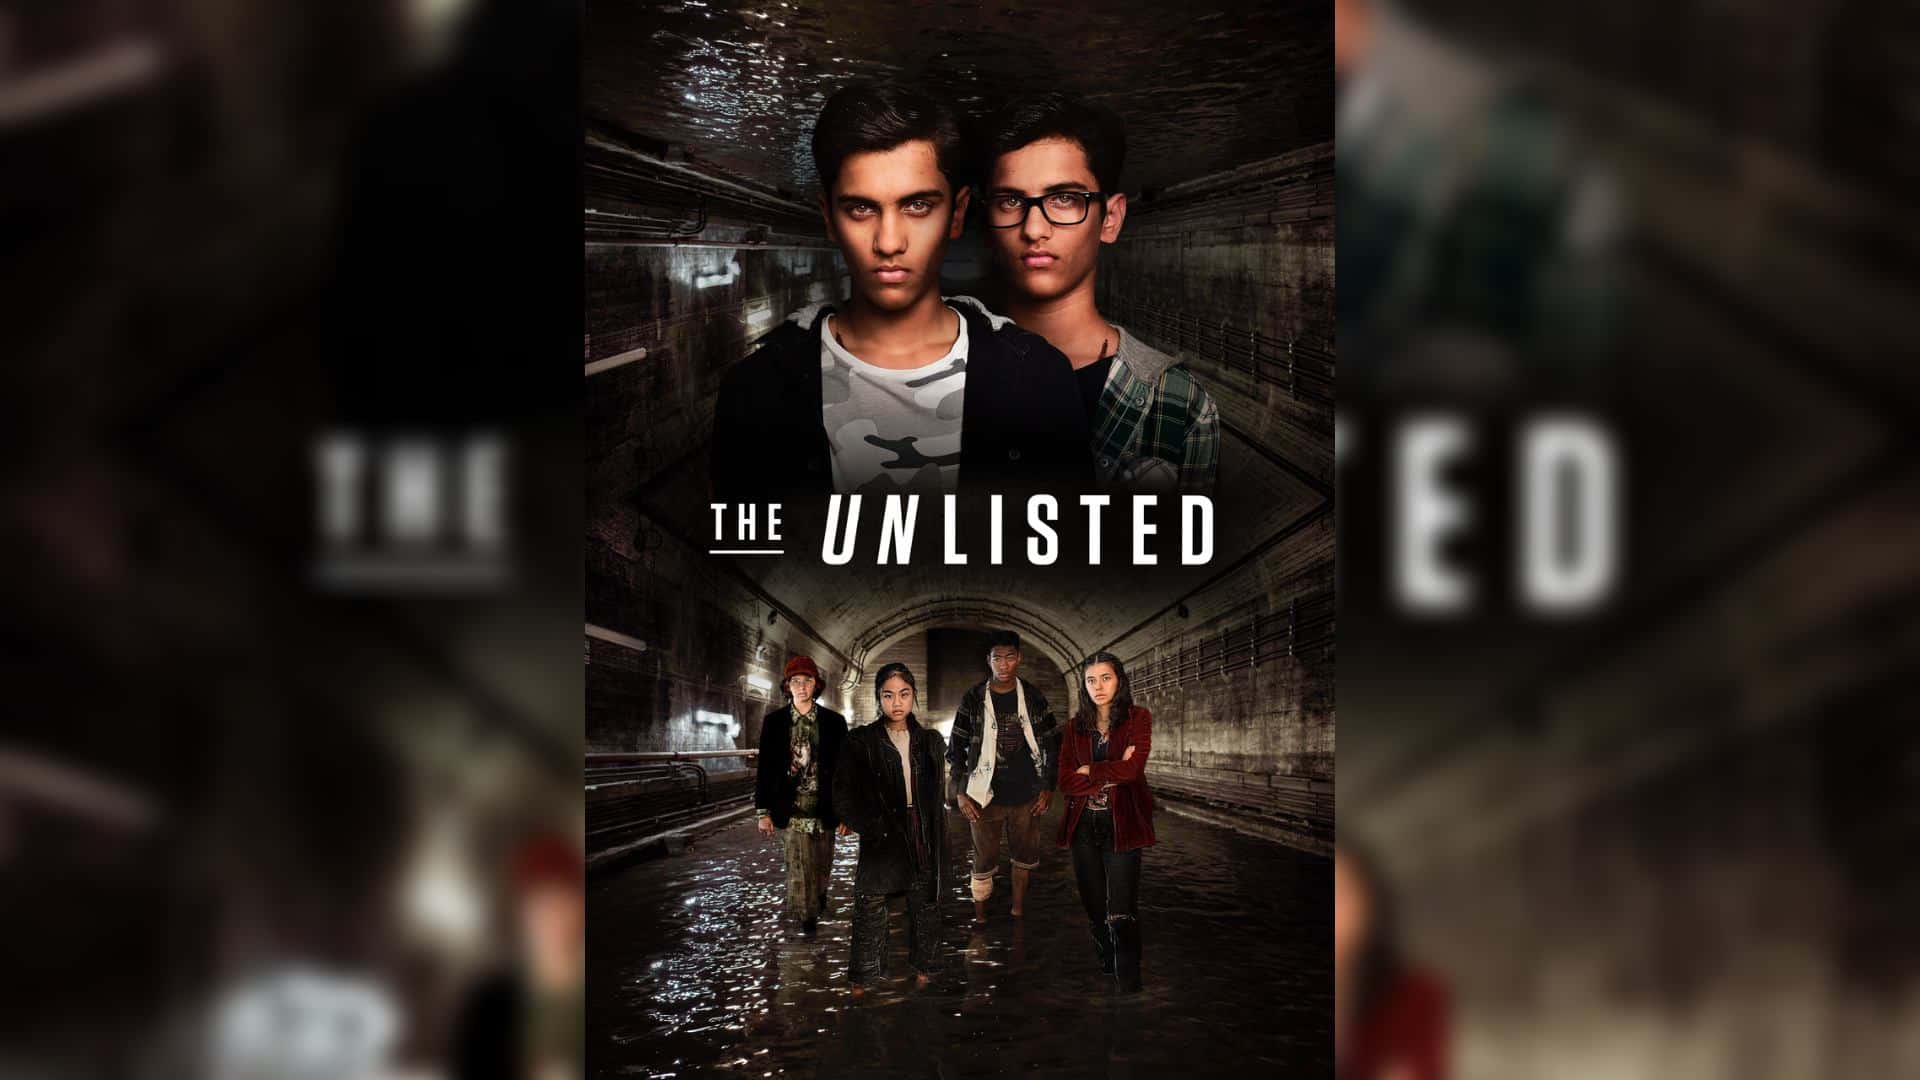 The Unlisted (2019) Season 1 S01 1080p Google Drive Download